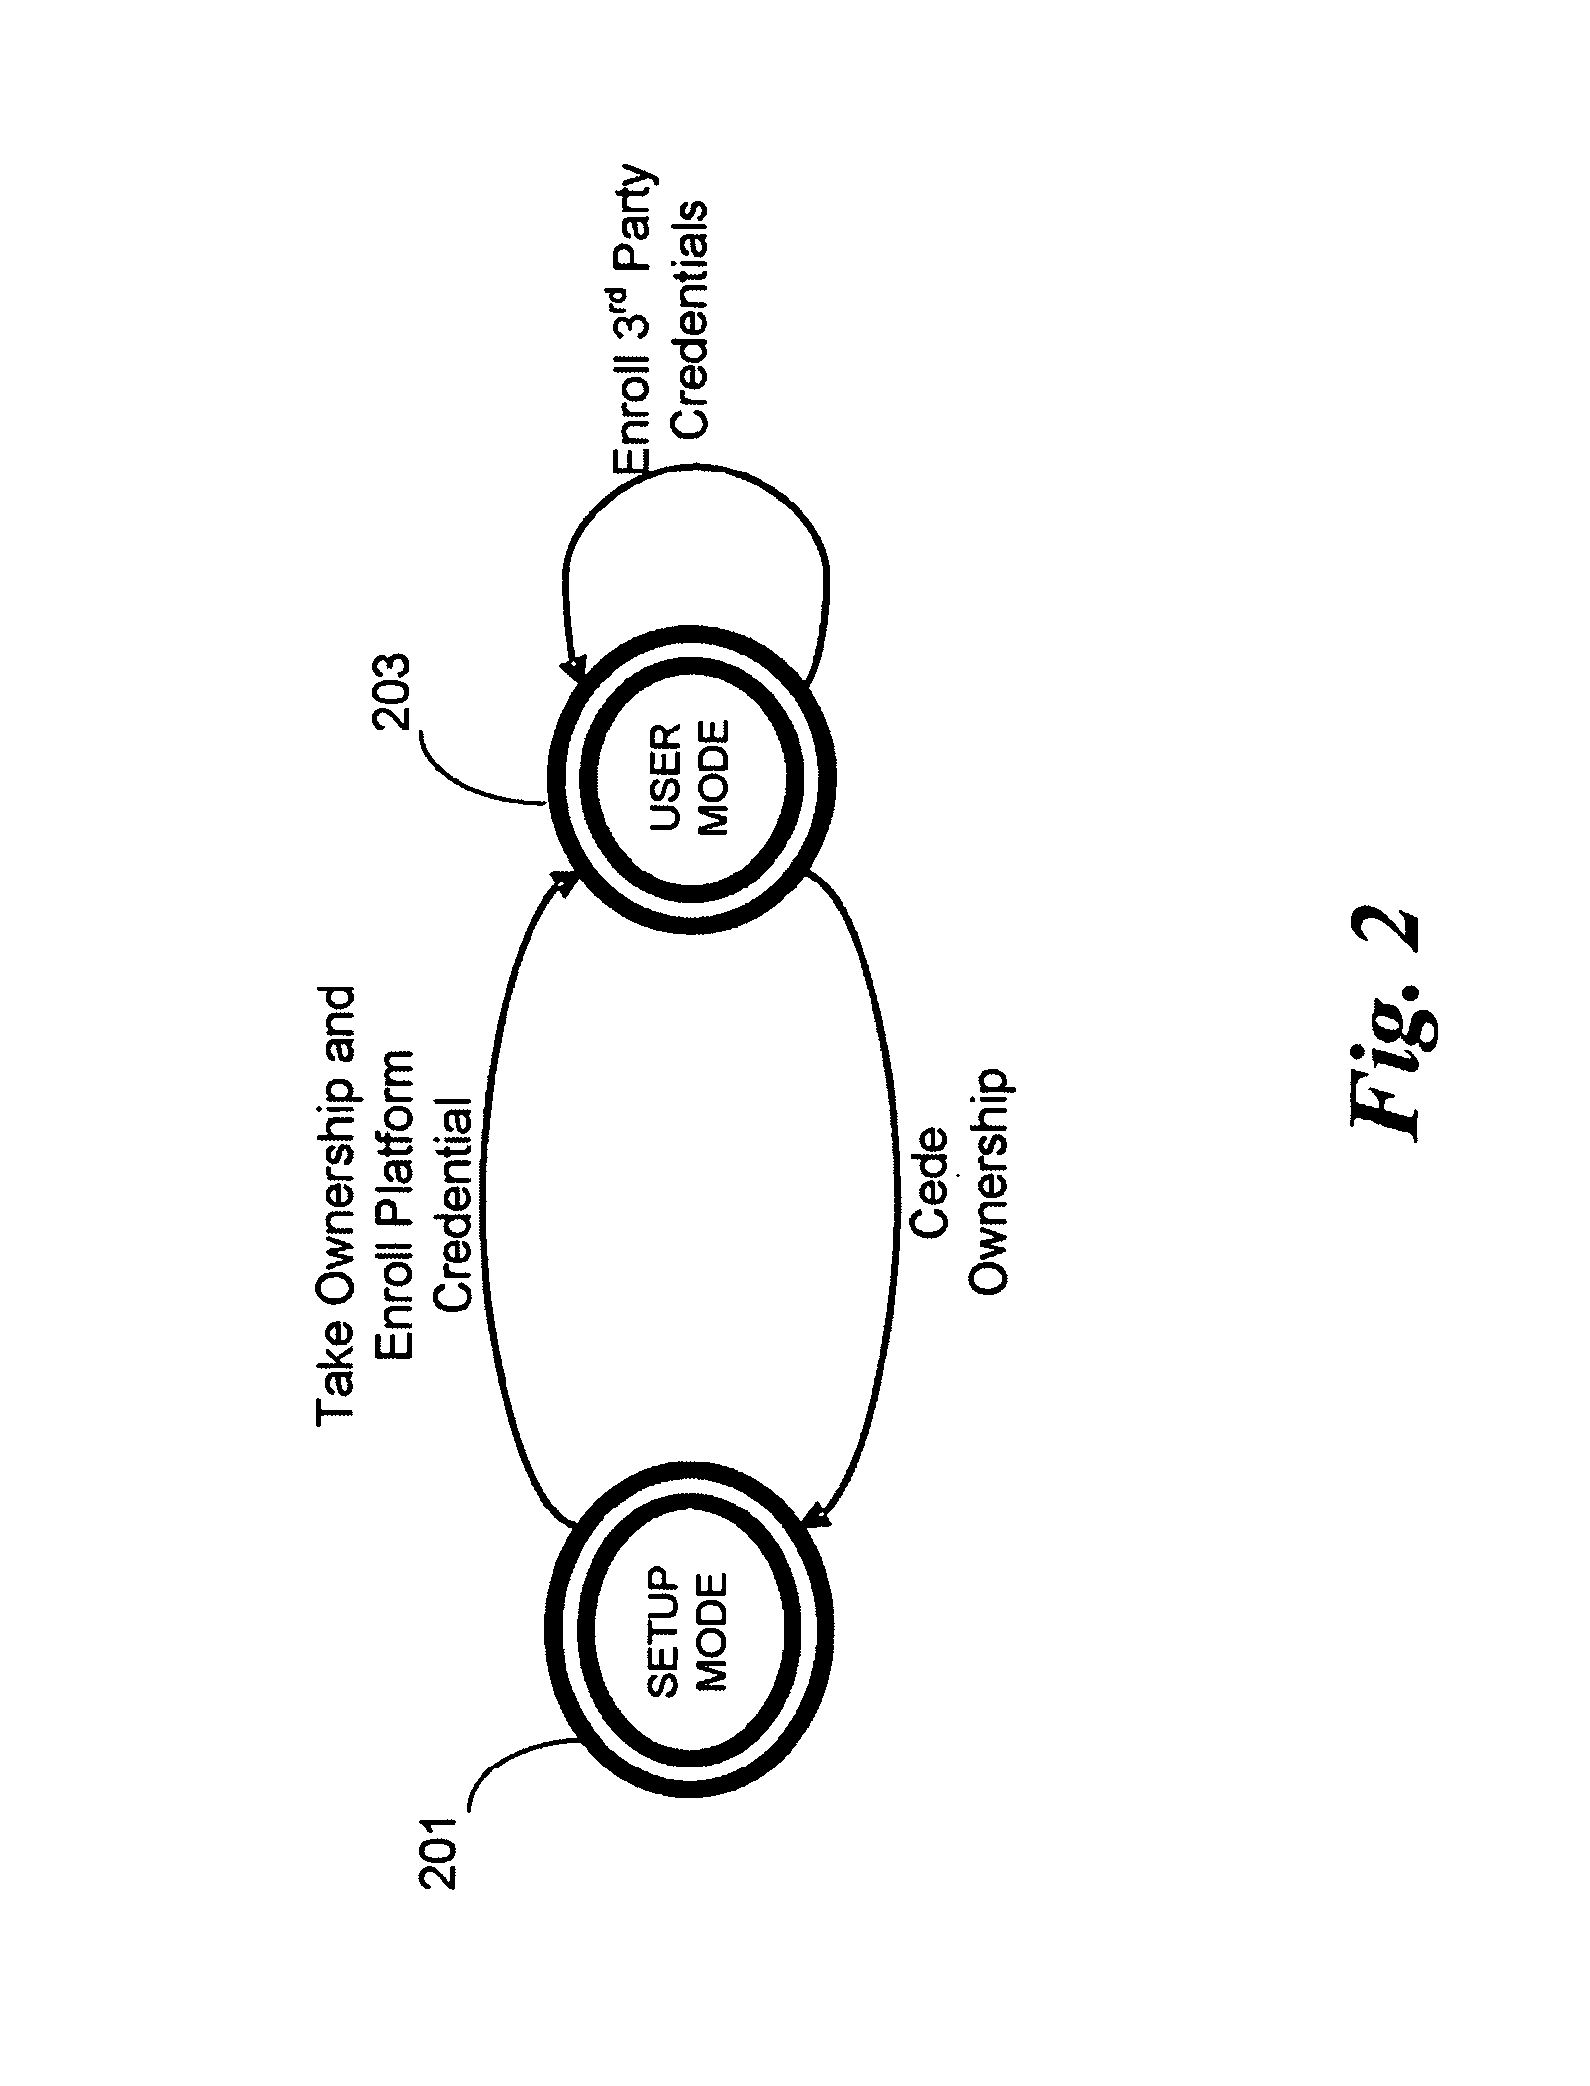 System and method to secure boot uefi firmware and uefi-aware operating systems on a mobile internet device (MID)